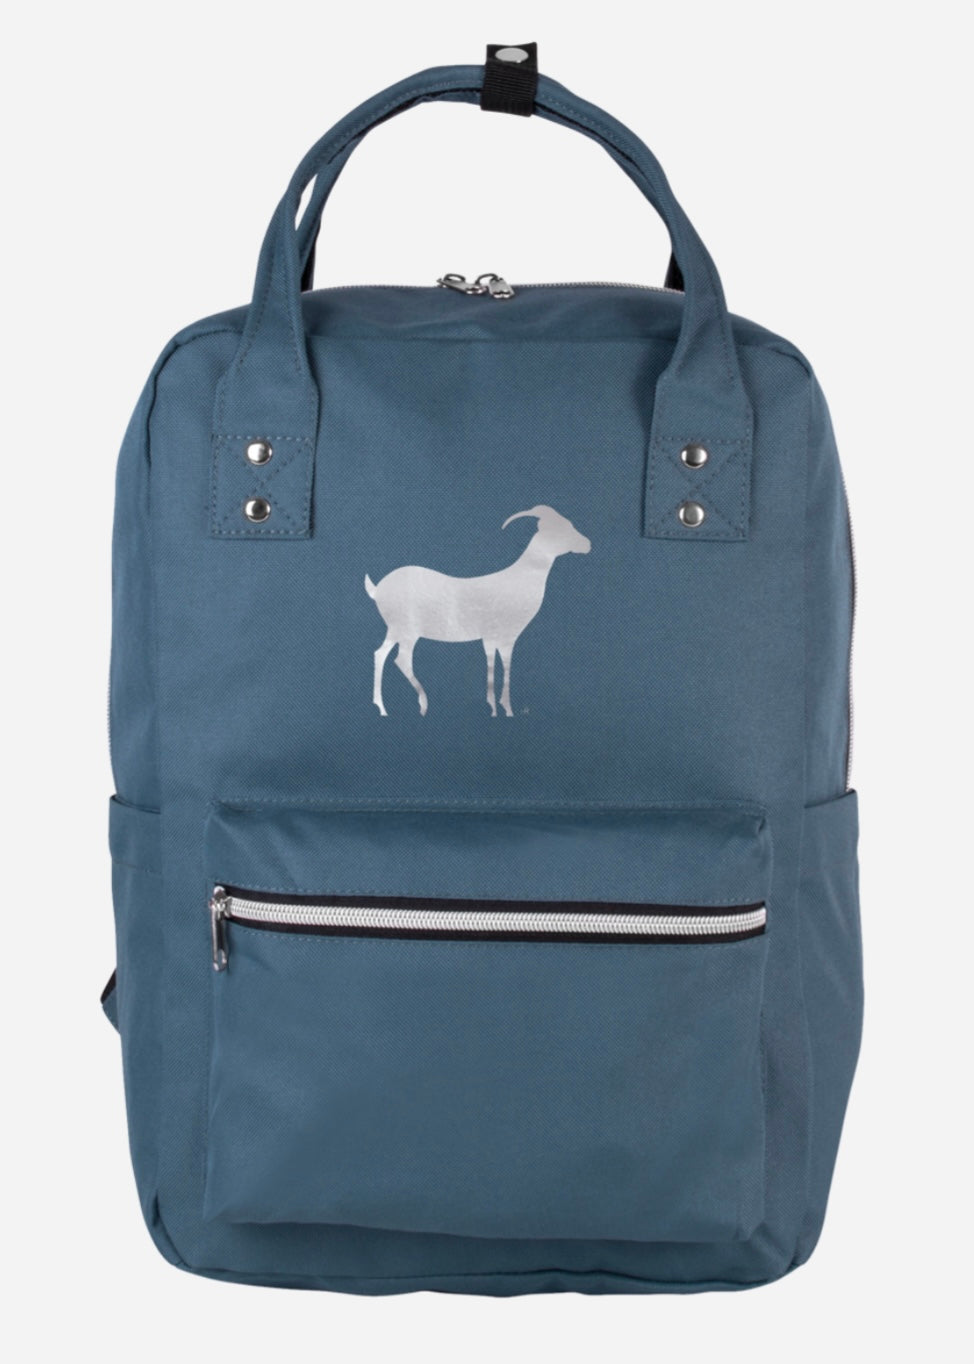 2-in-1 Backpack (Navy) THE MOTLEY GOAT